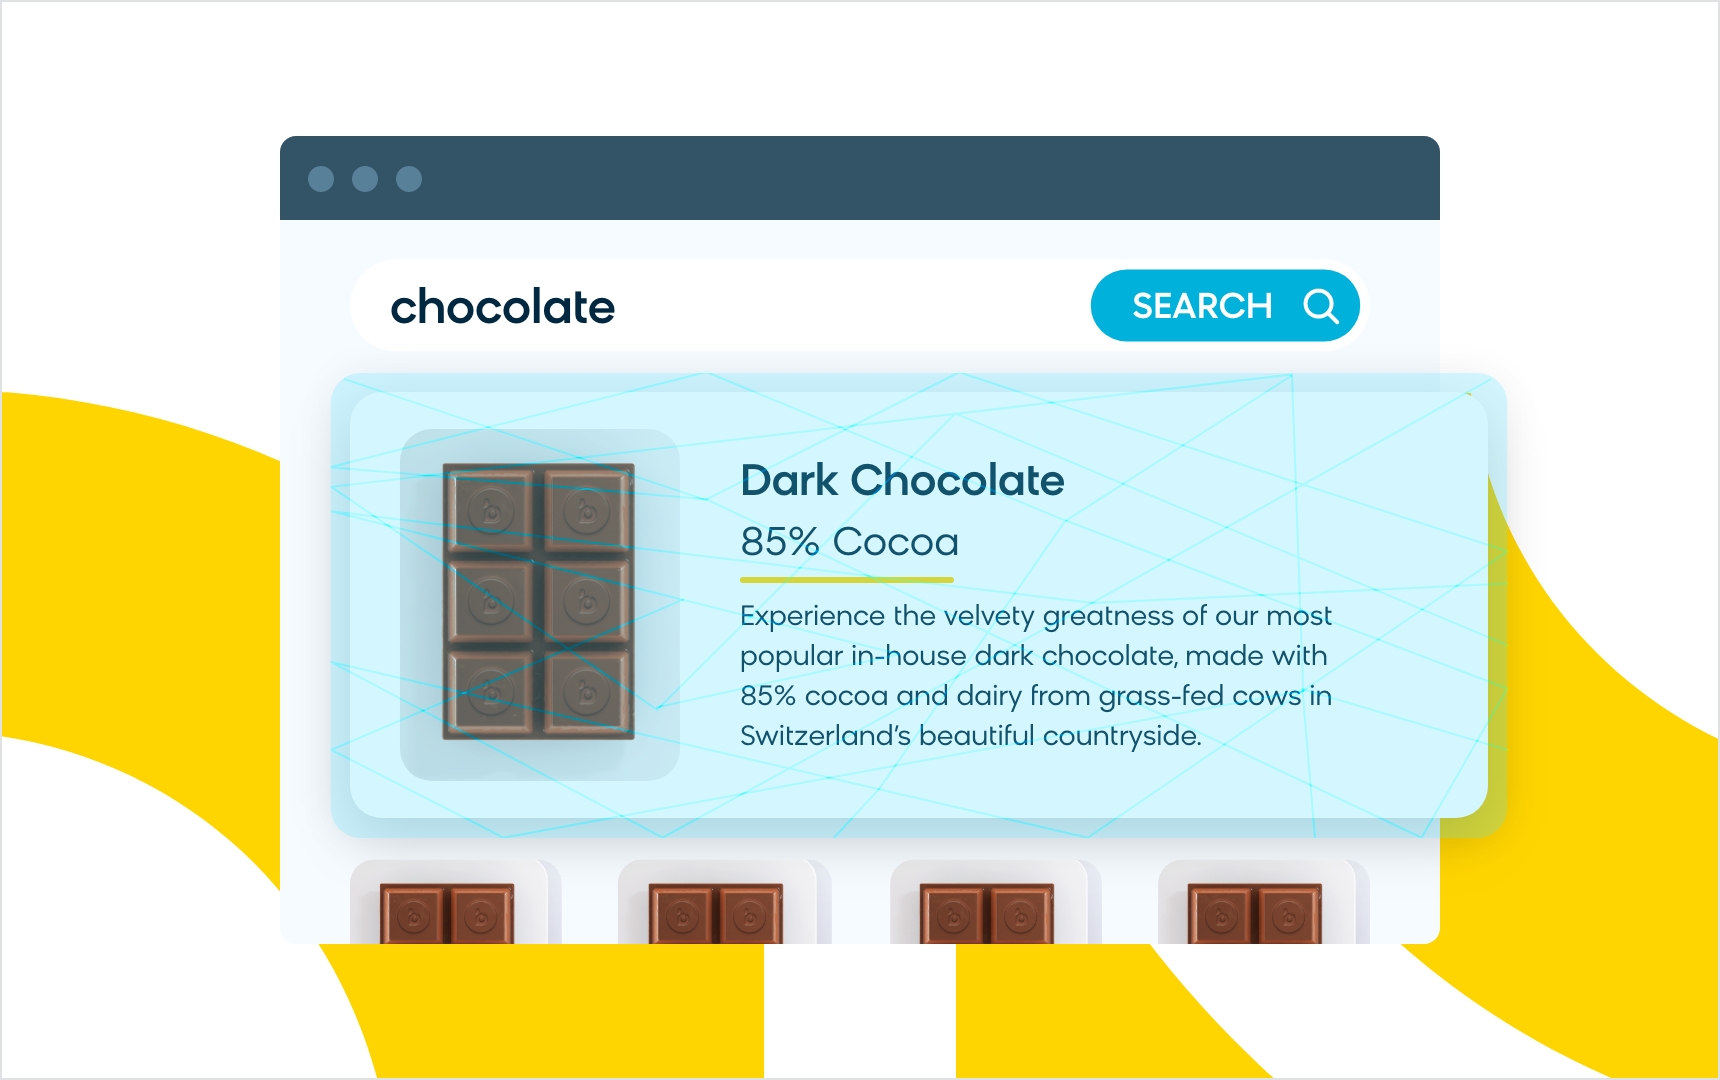 Example of AI search surfacing preferred types of chocolate in search results